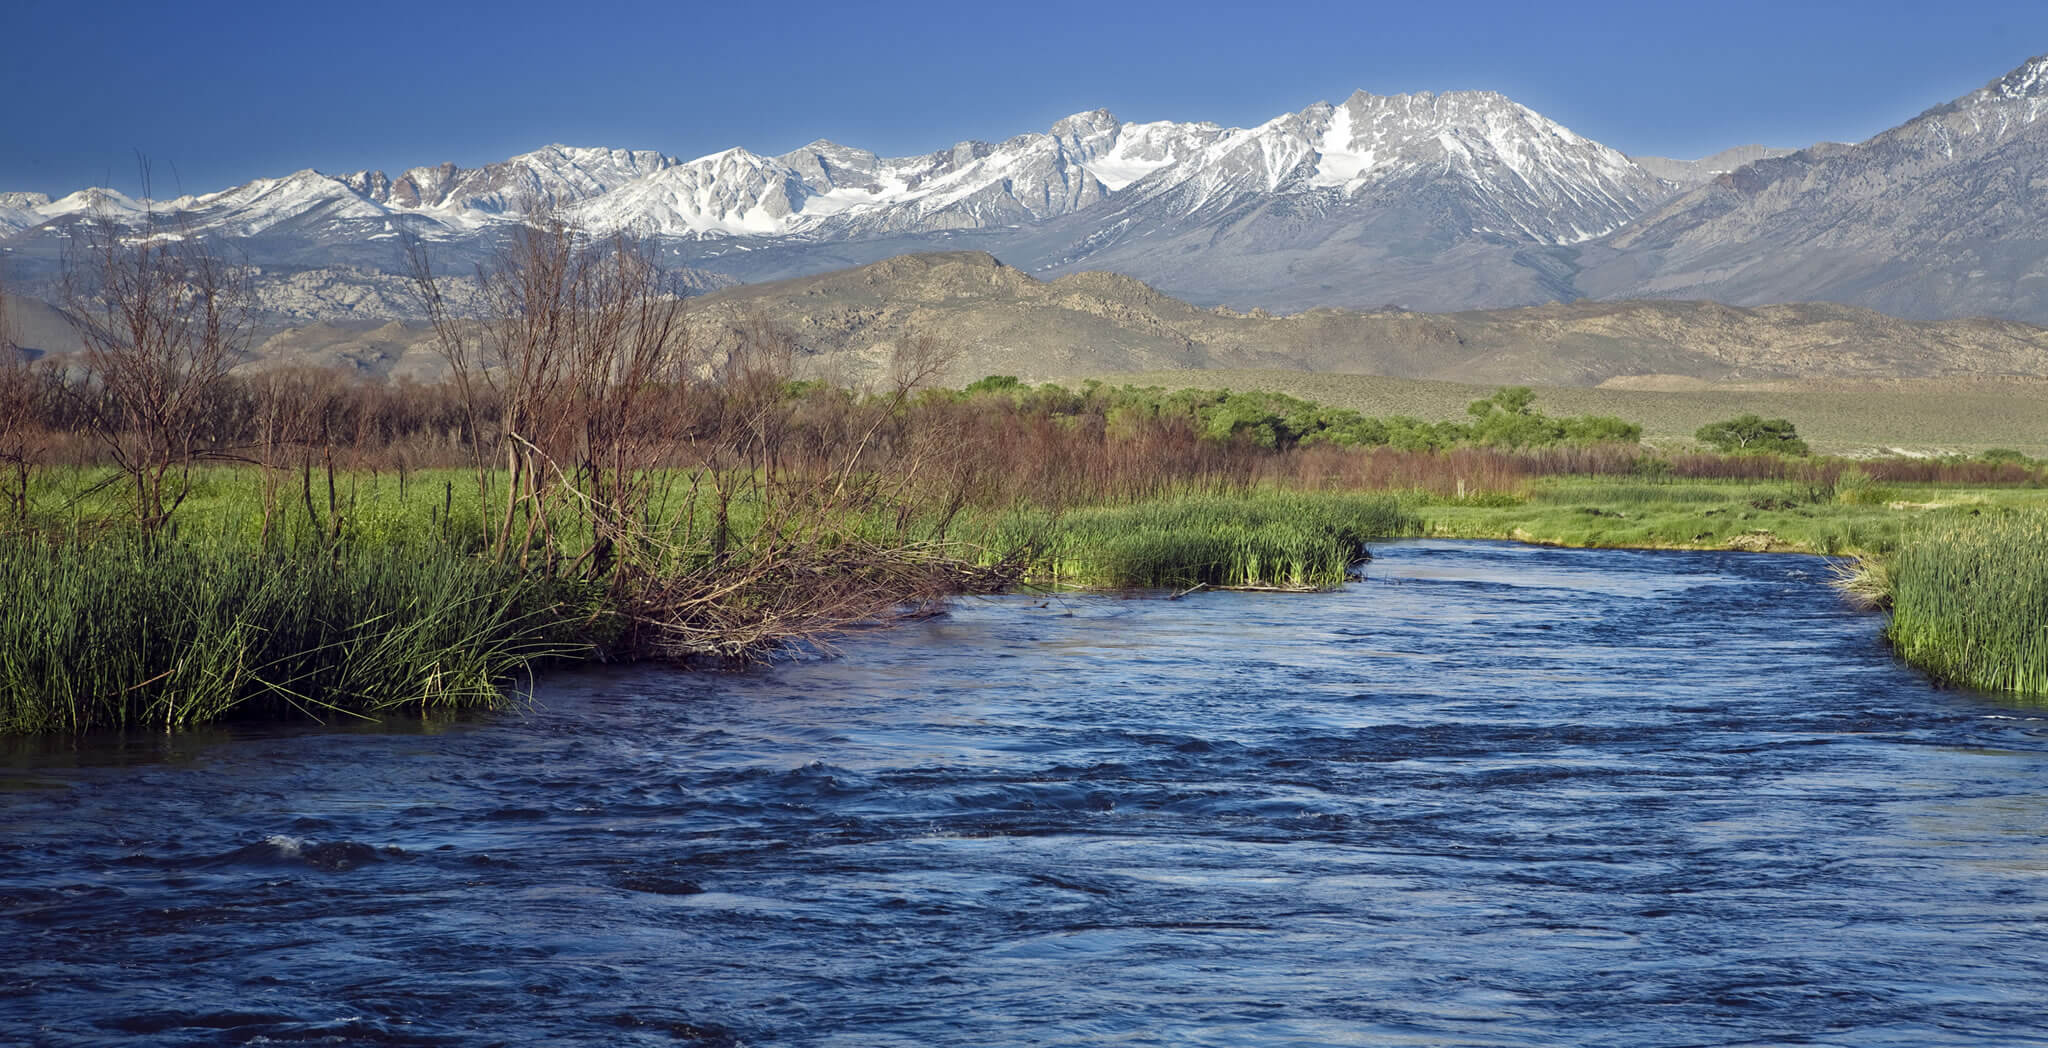 Owens Valley Inyo County Tourism Information Center Inyo County Visitor Guides And Maps